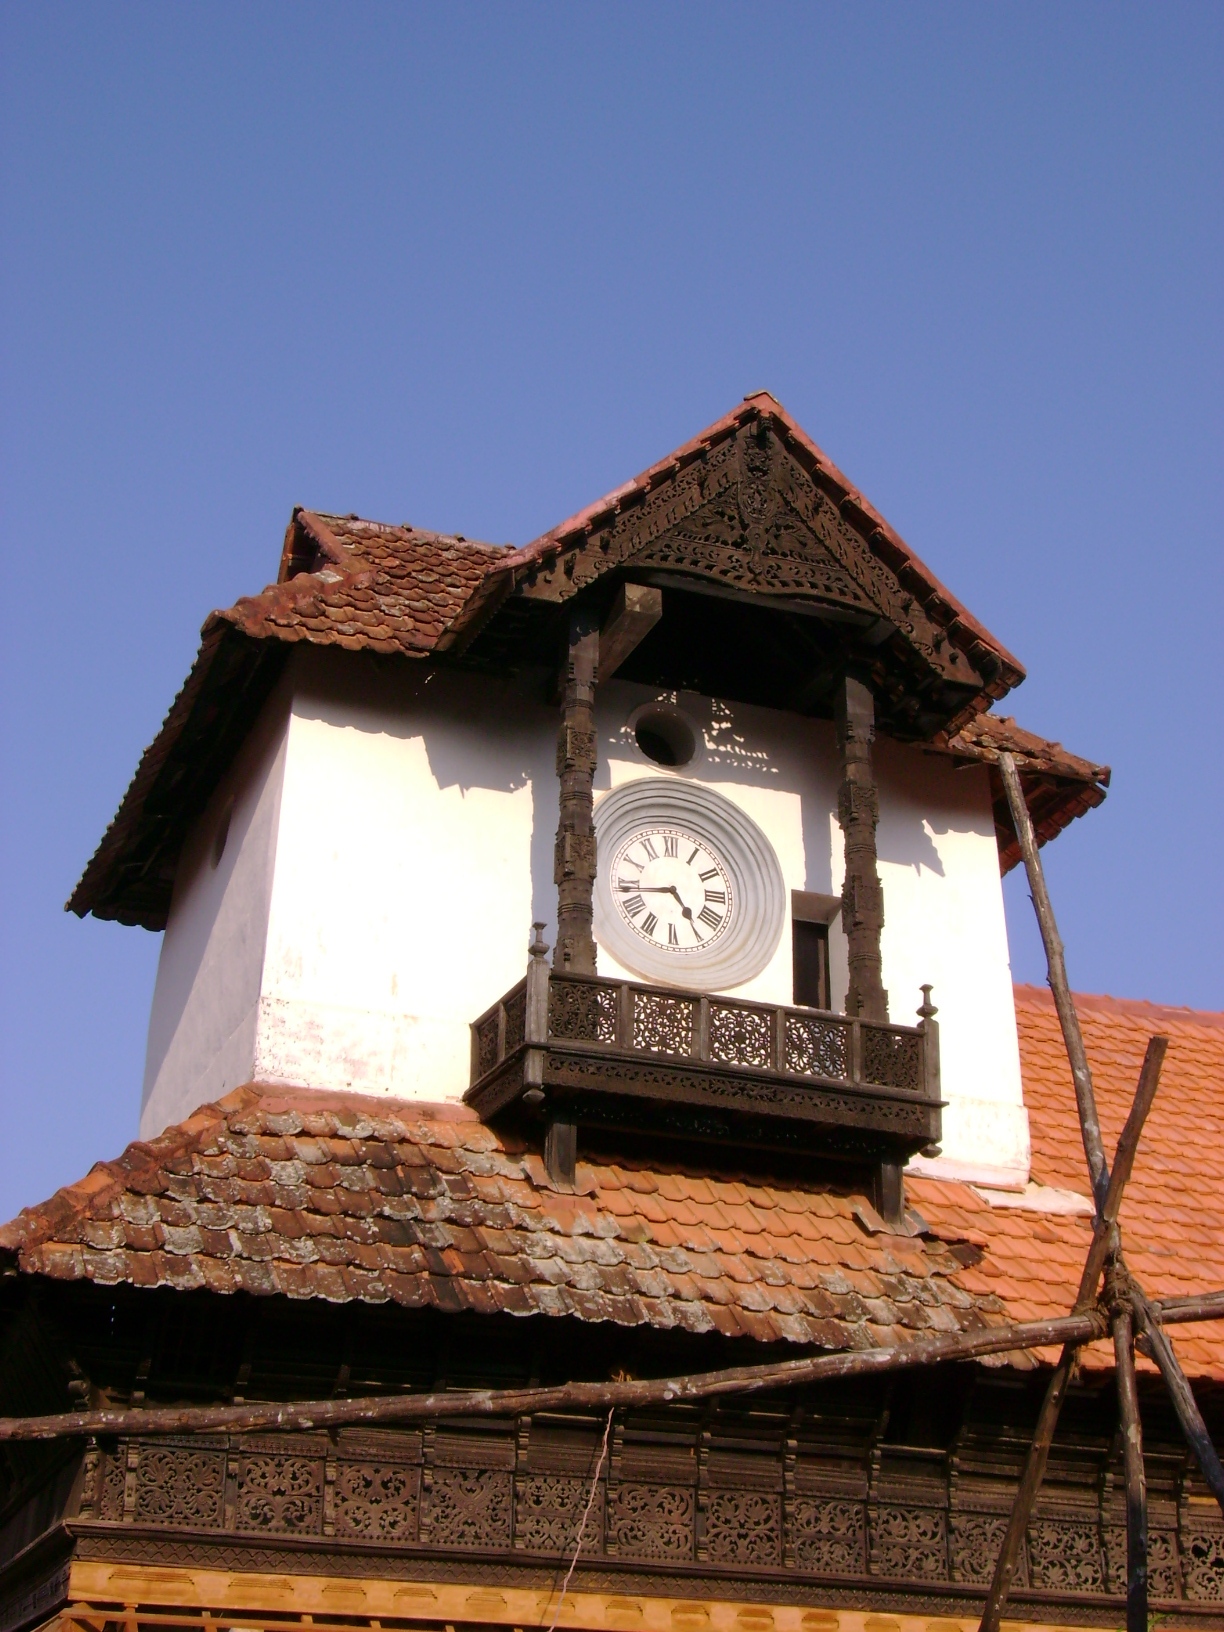 a small building that has a clock attached to the roof